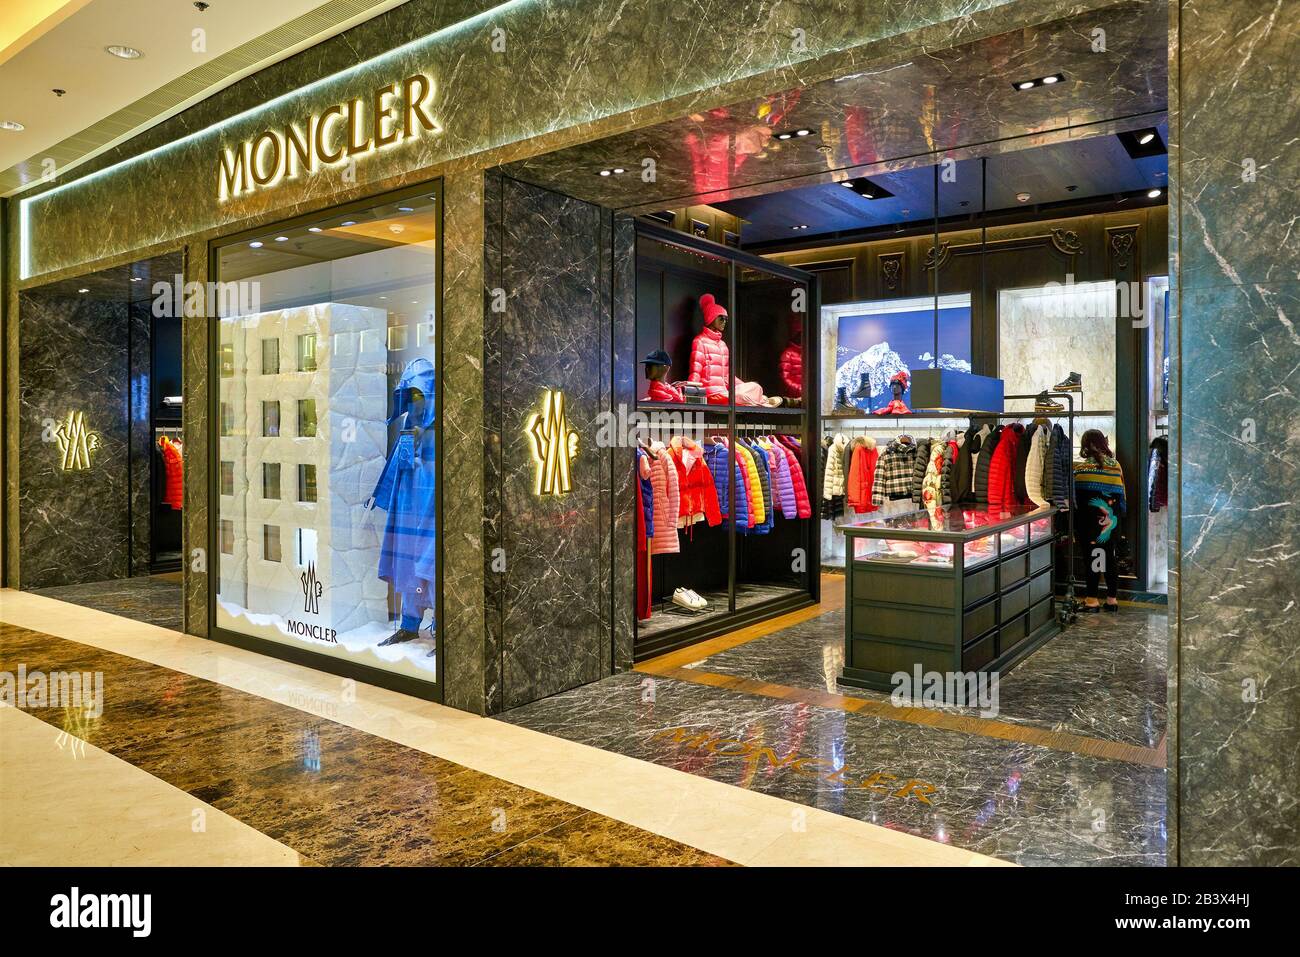 Page 2 - Moncler Store High Resolution Stock Photography and Images - Alamy